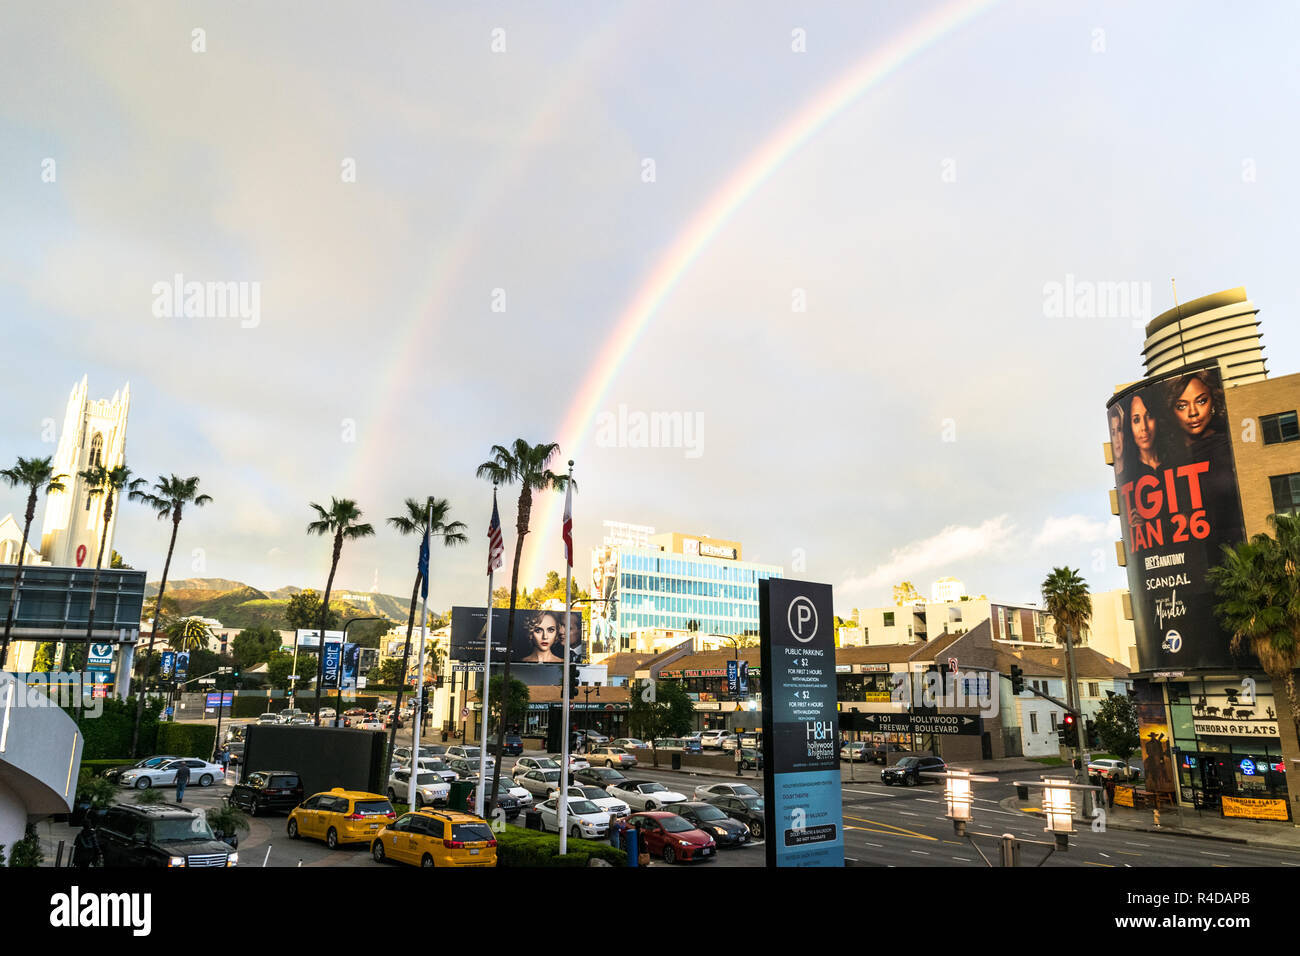 LOS ANGELES, USA - FEBRUARY 18, 2017: Hollywood and Highland Complex - Los Angeles, California USA Stock Photo